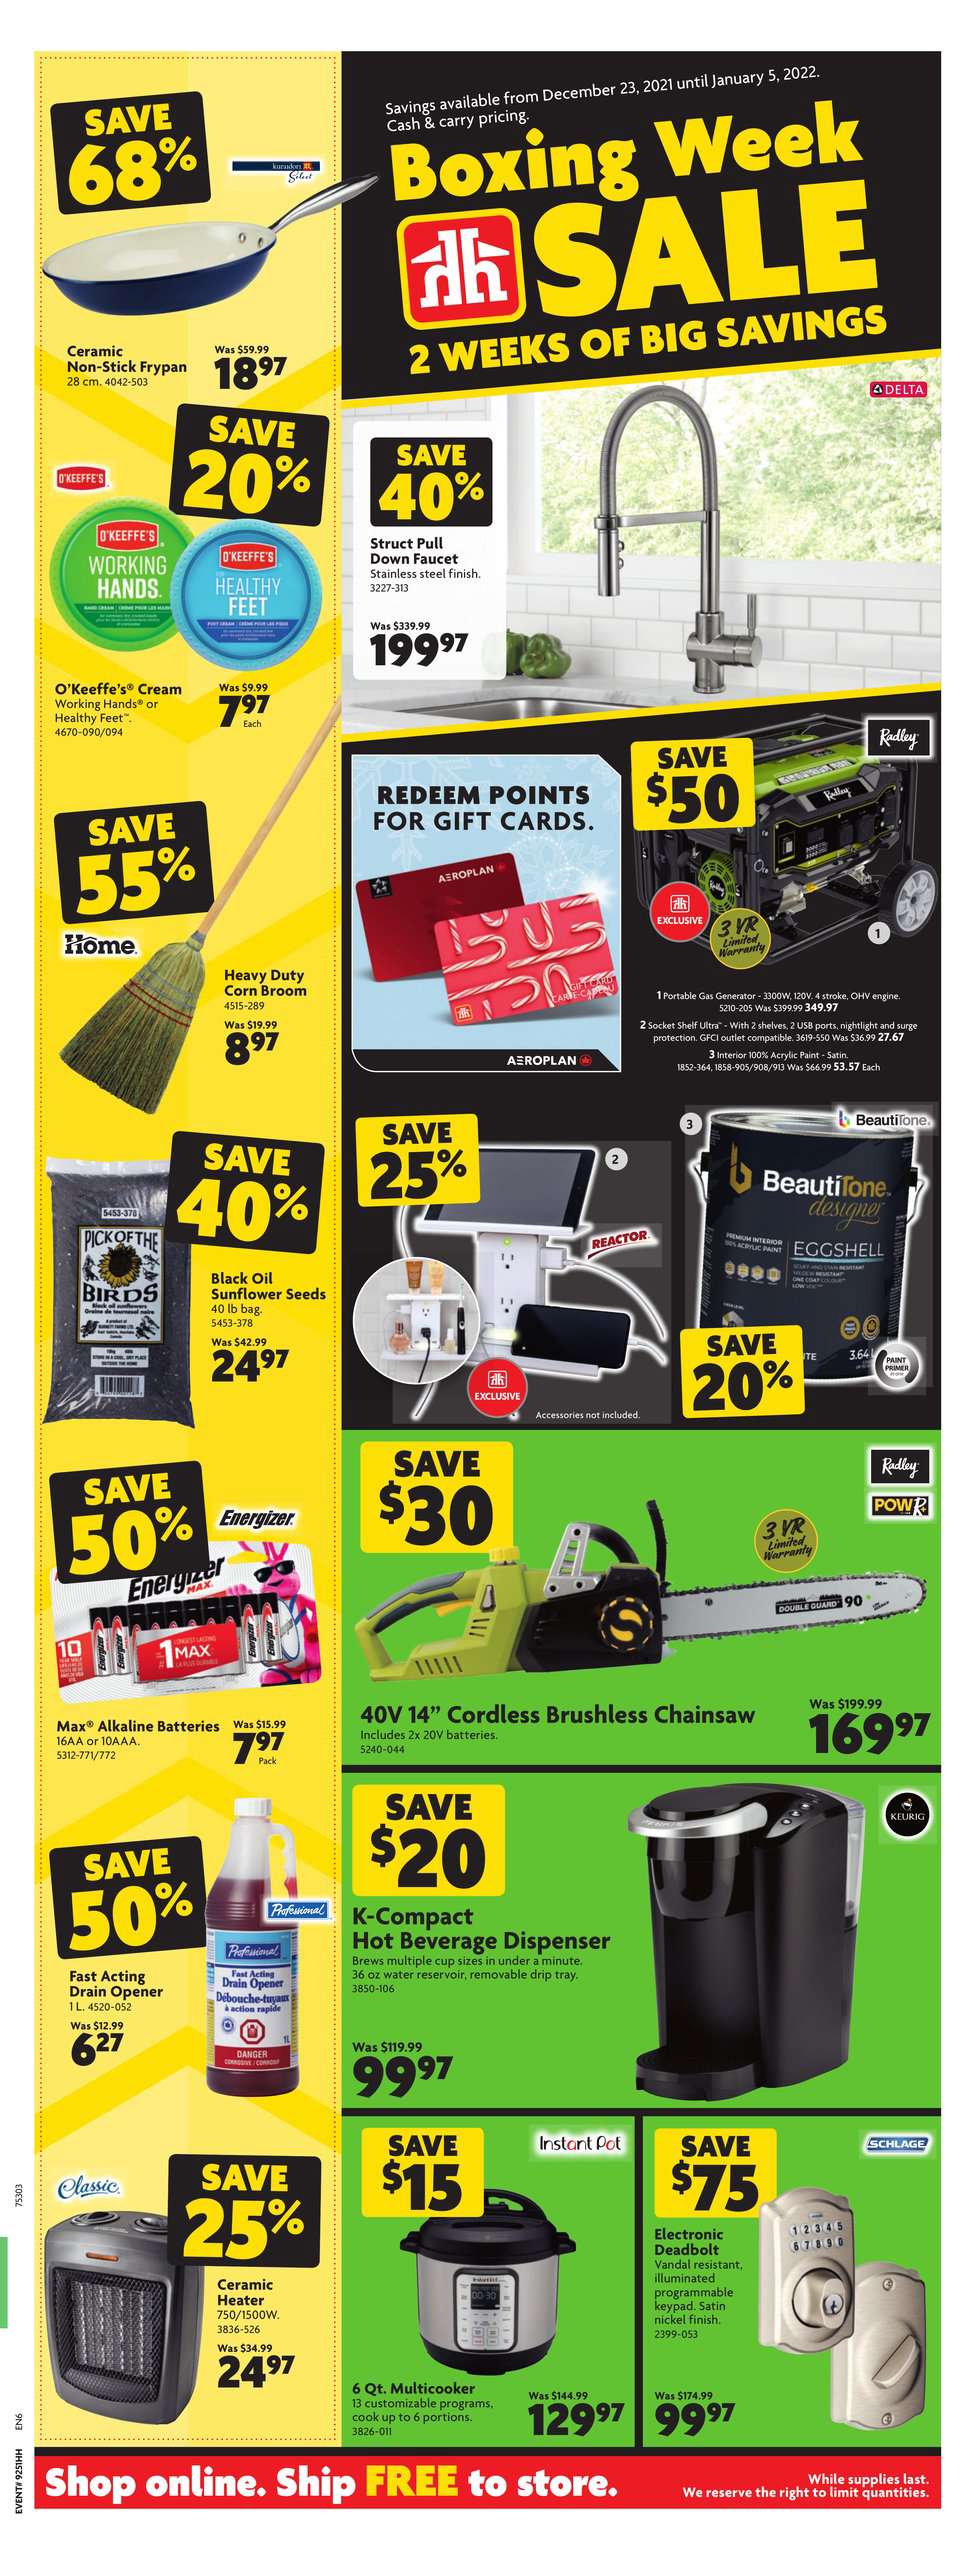 Home Hardware Flyer – Boxing Day Sales 2021